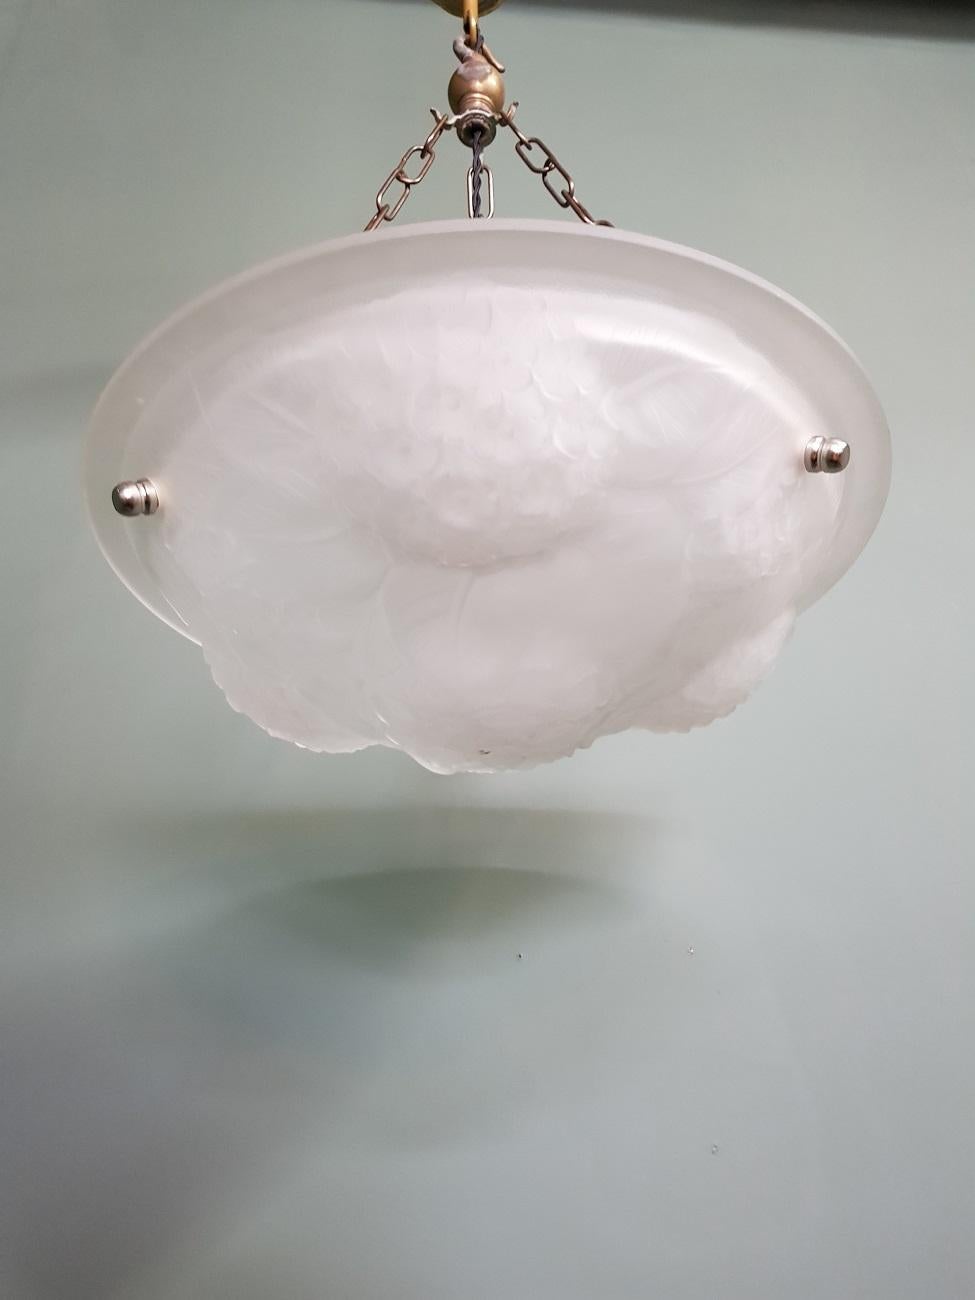 French Art Deco Glass dish pendant with relief in the form of flowers and leaves, rewired and made in the 1930s.

The measurements are:
Depth 35 cm/ 13.7 inch.
Width 35 cm/ 13.7 inch.
Height 64 cm/ 25.1 inch.